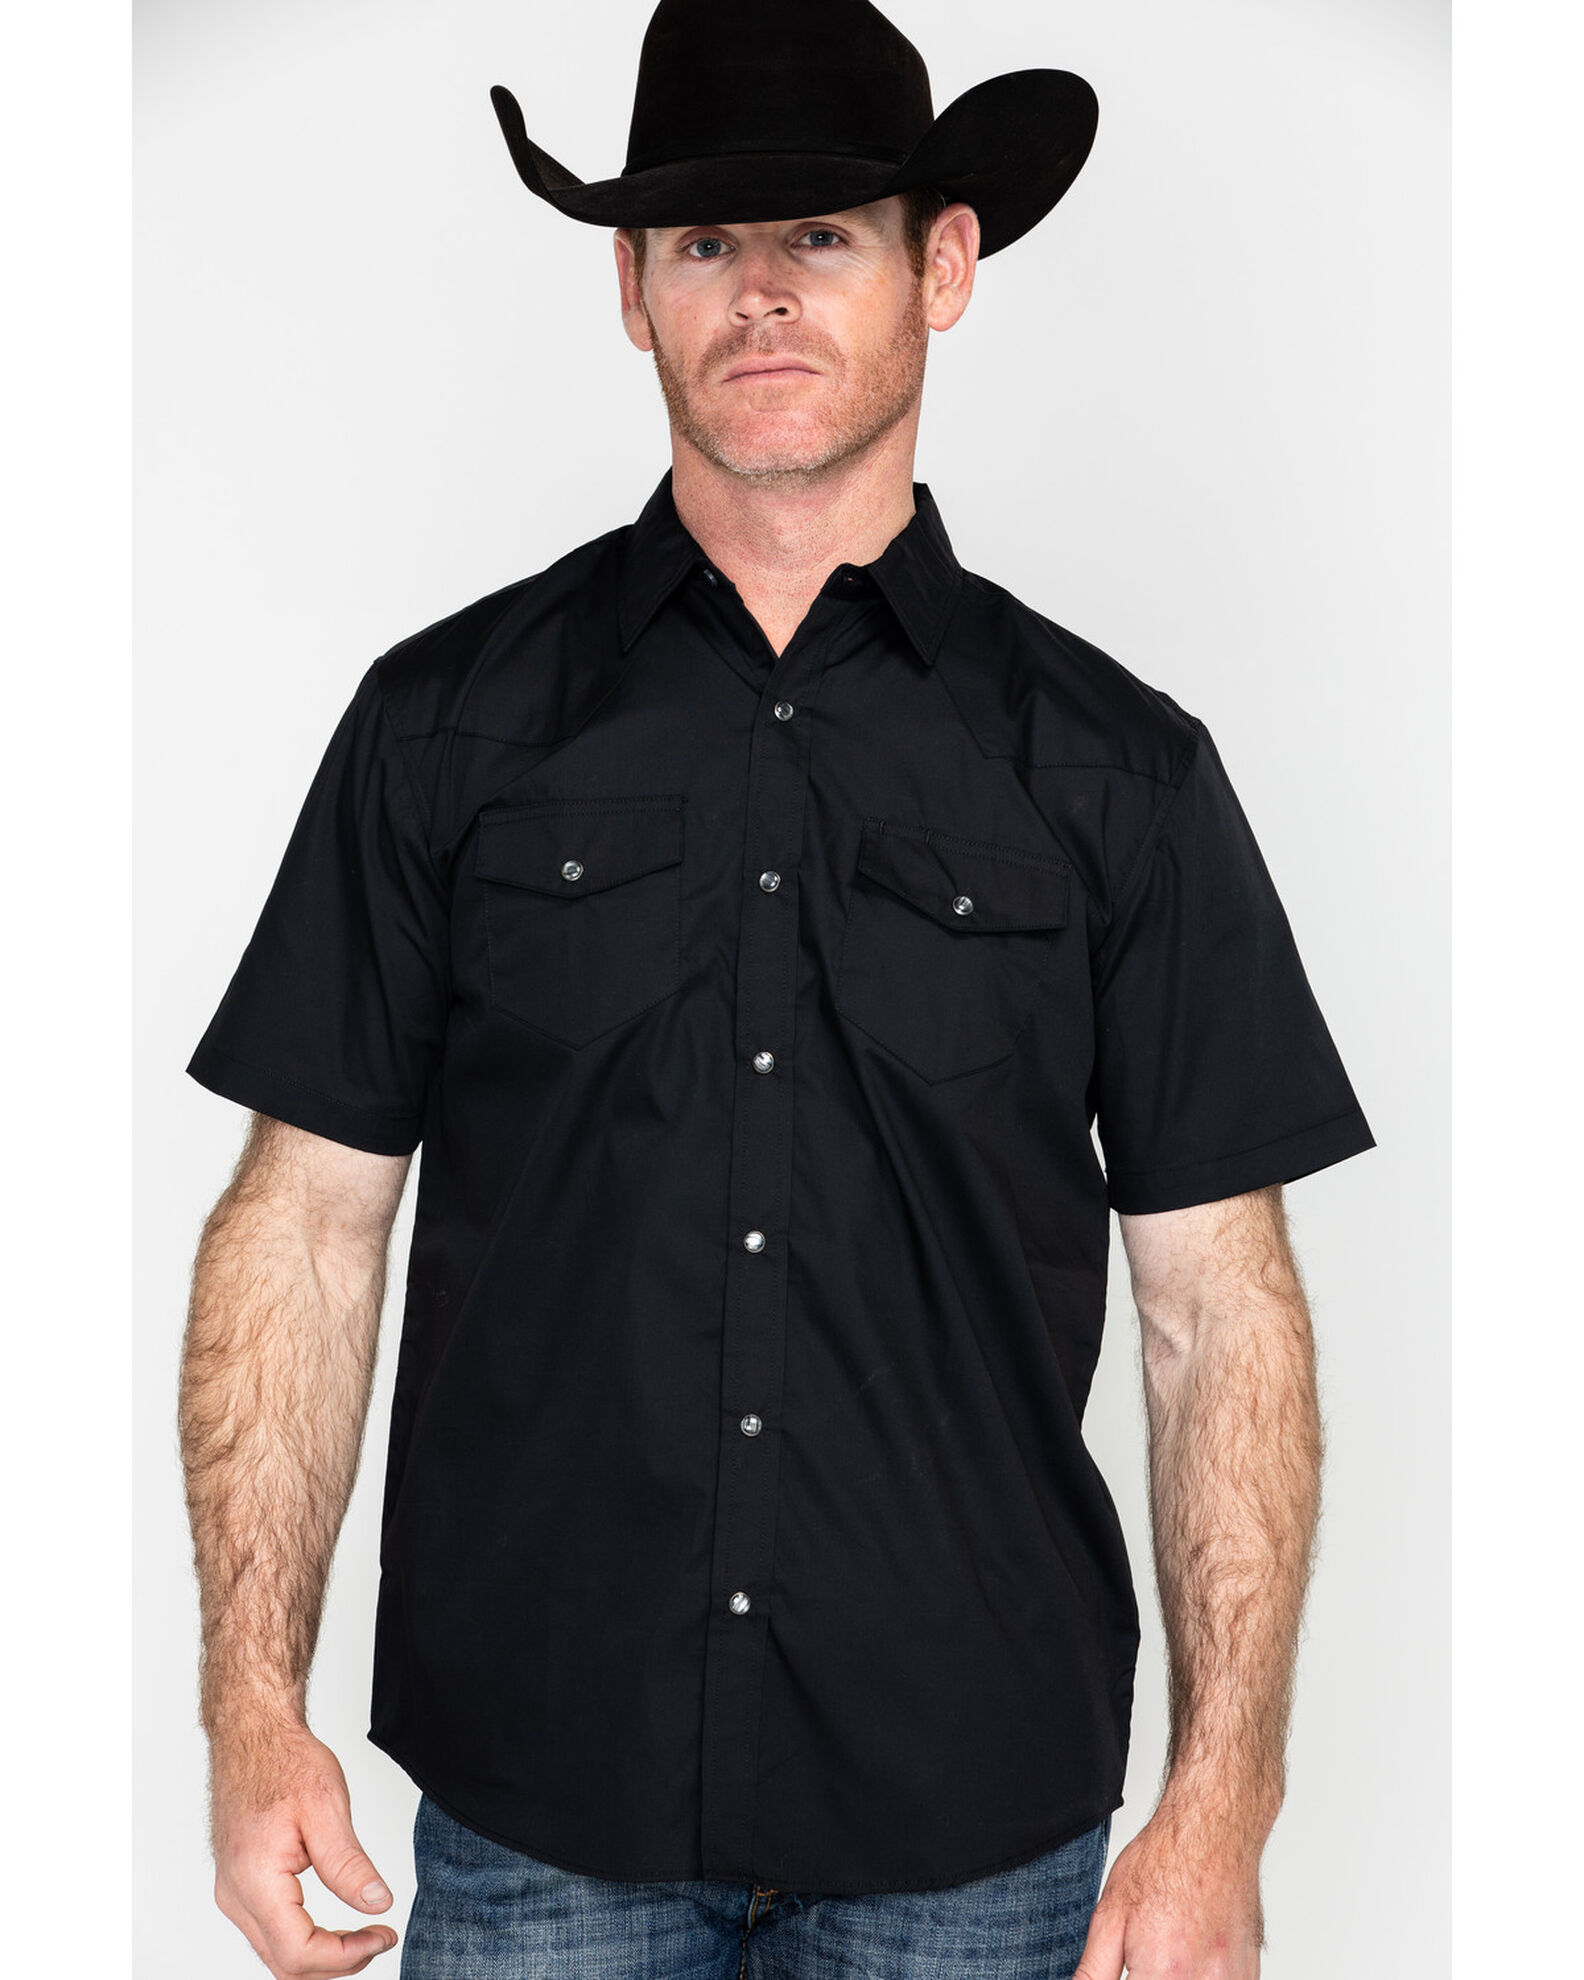 Gibson Men's Solid Pearl Snap Short Sleeve Western Shirt - Country